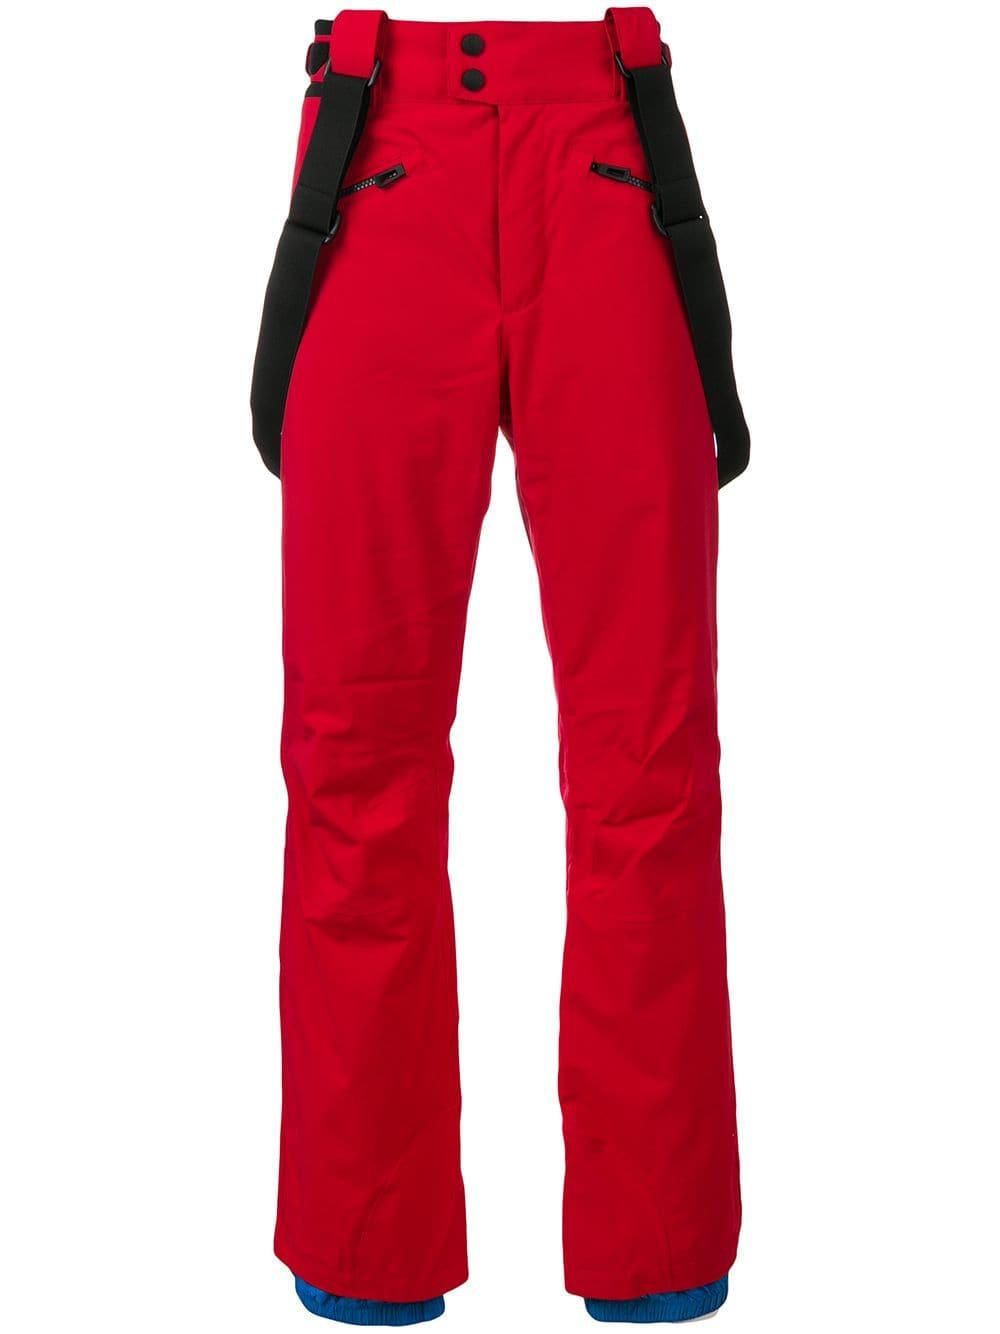 Rossignol Synthetic Classique Ski Pants in Red for Men - Lyst